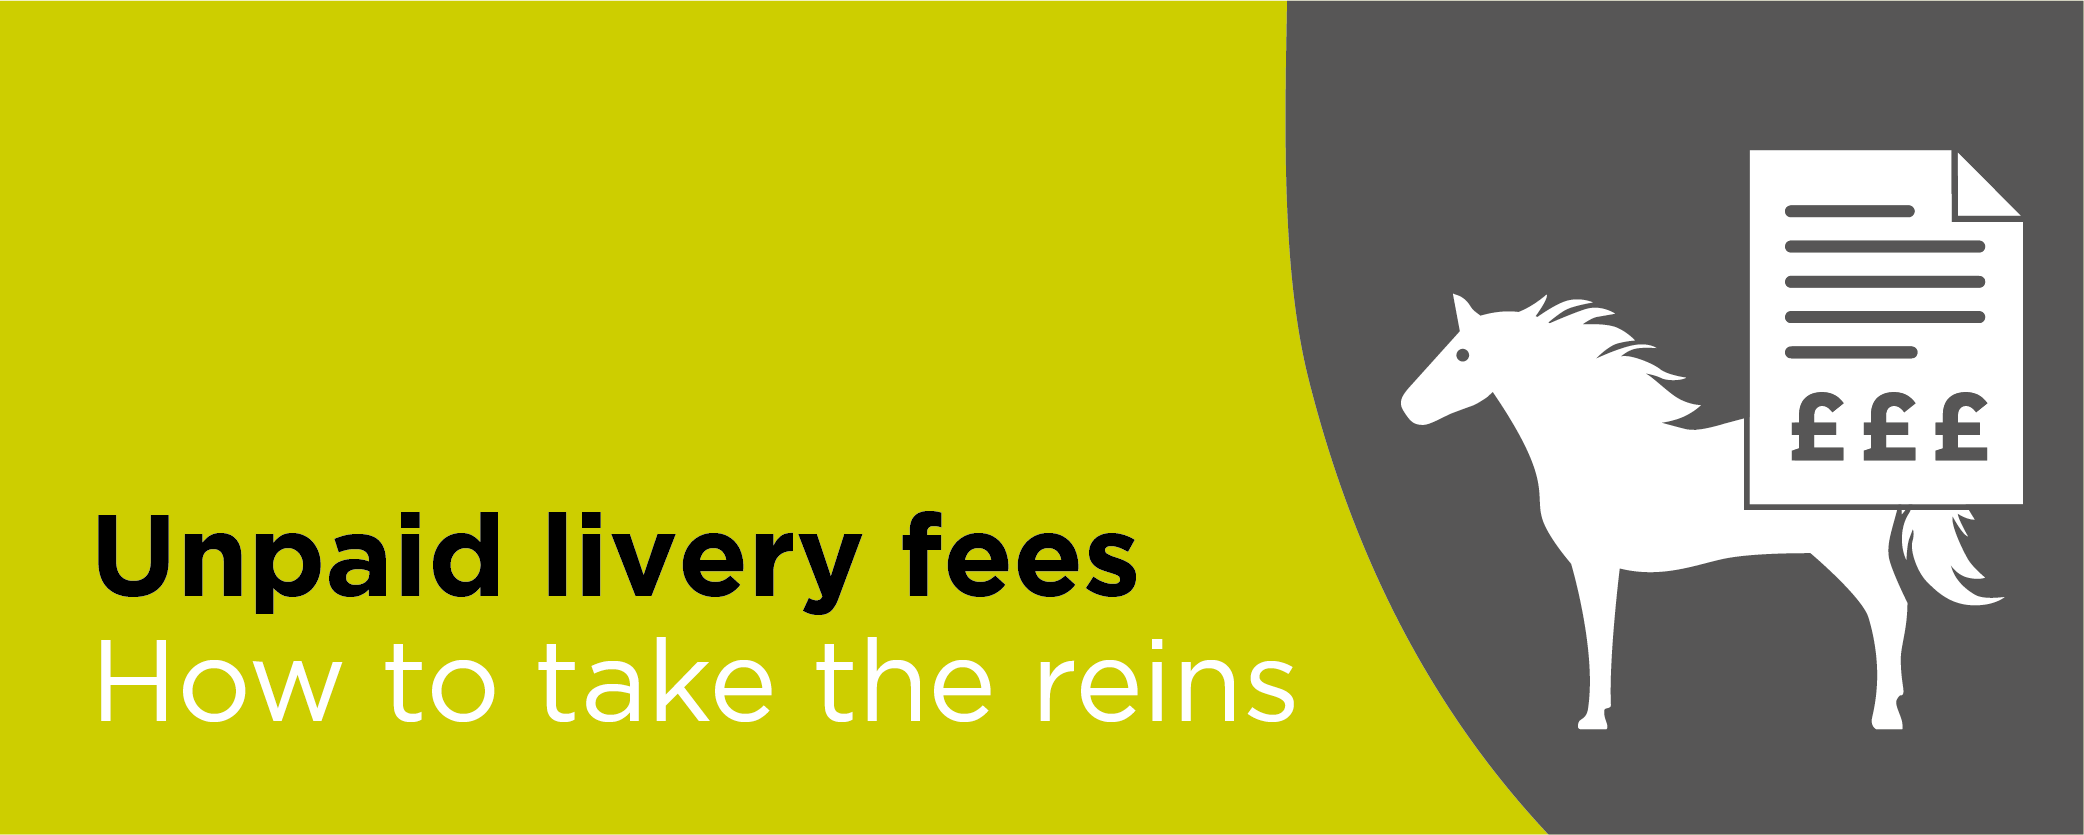 Unpaid livery fees: How to take the reins